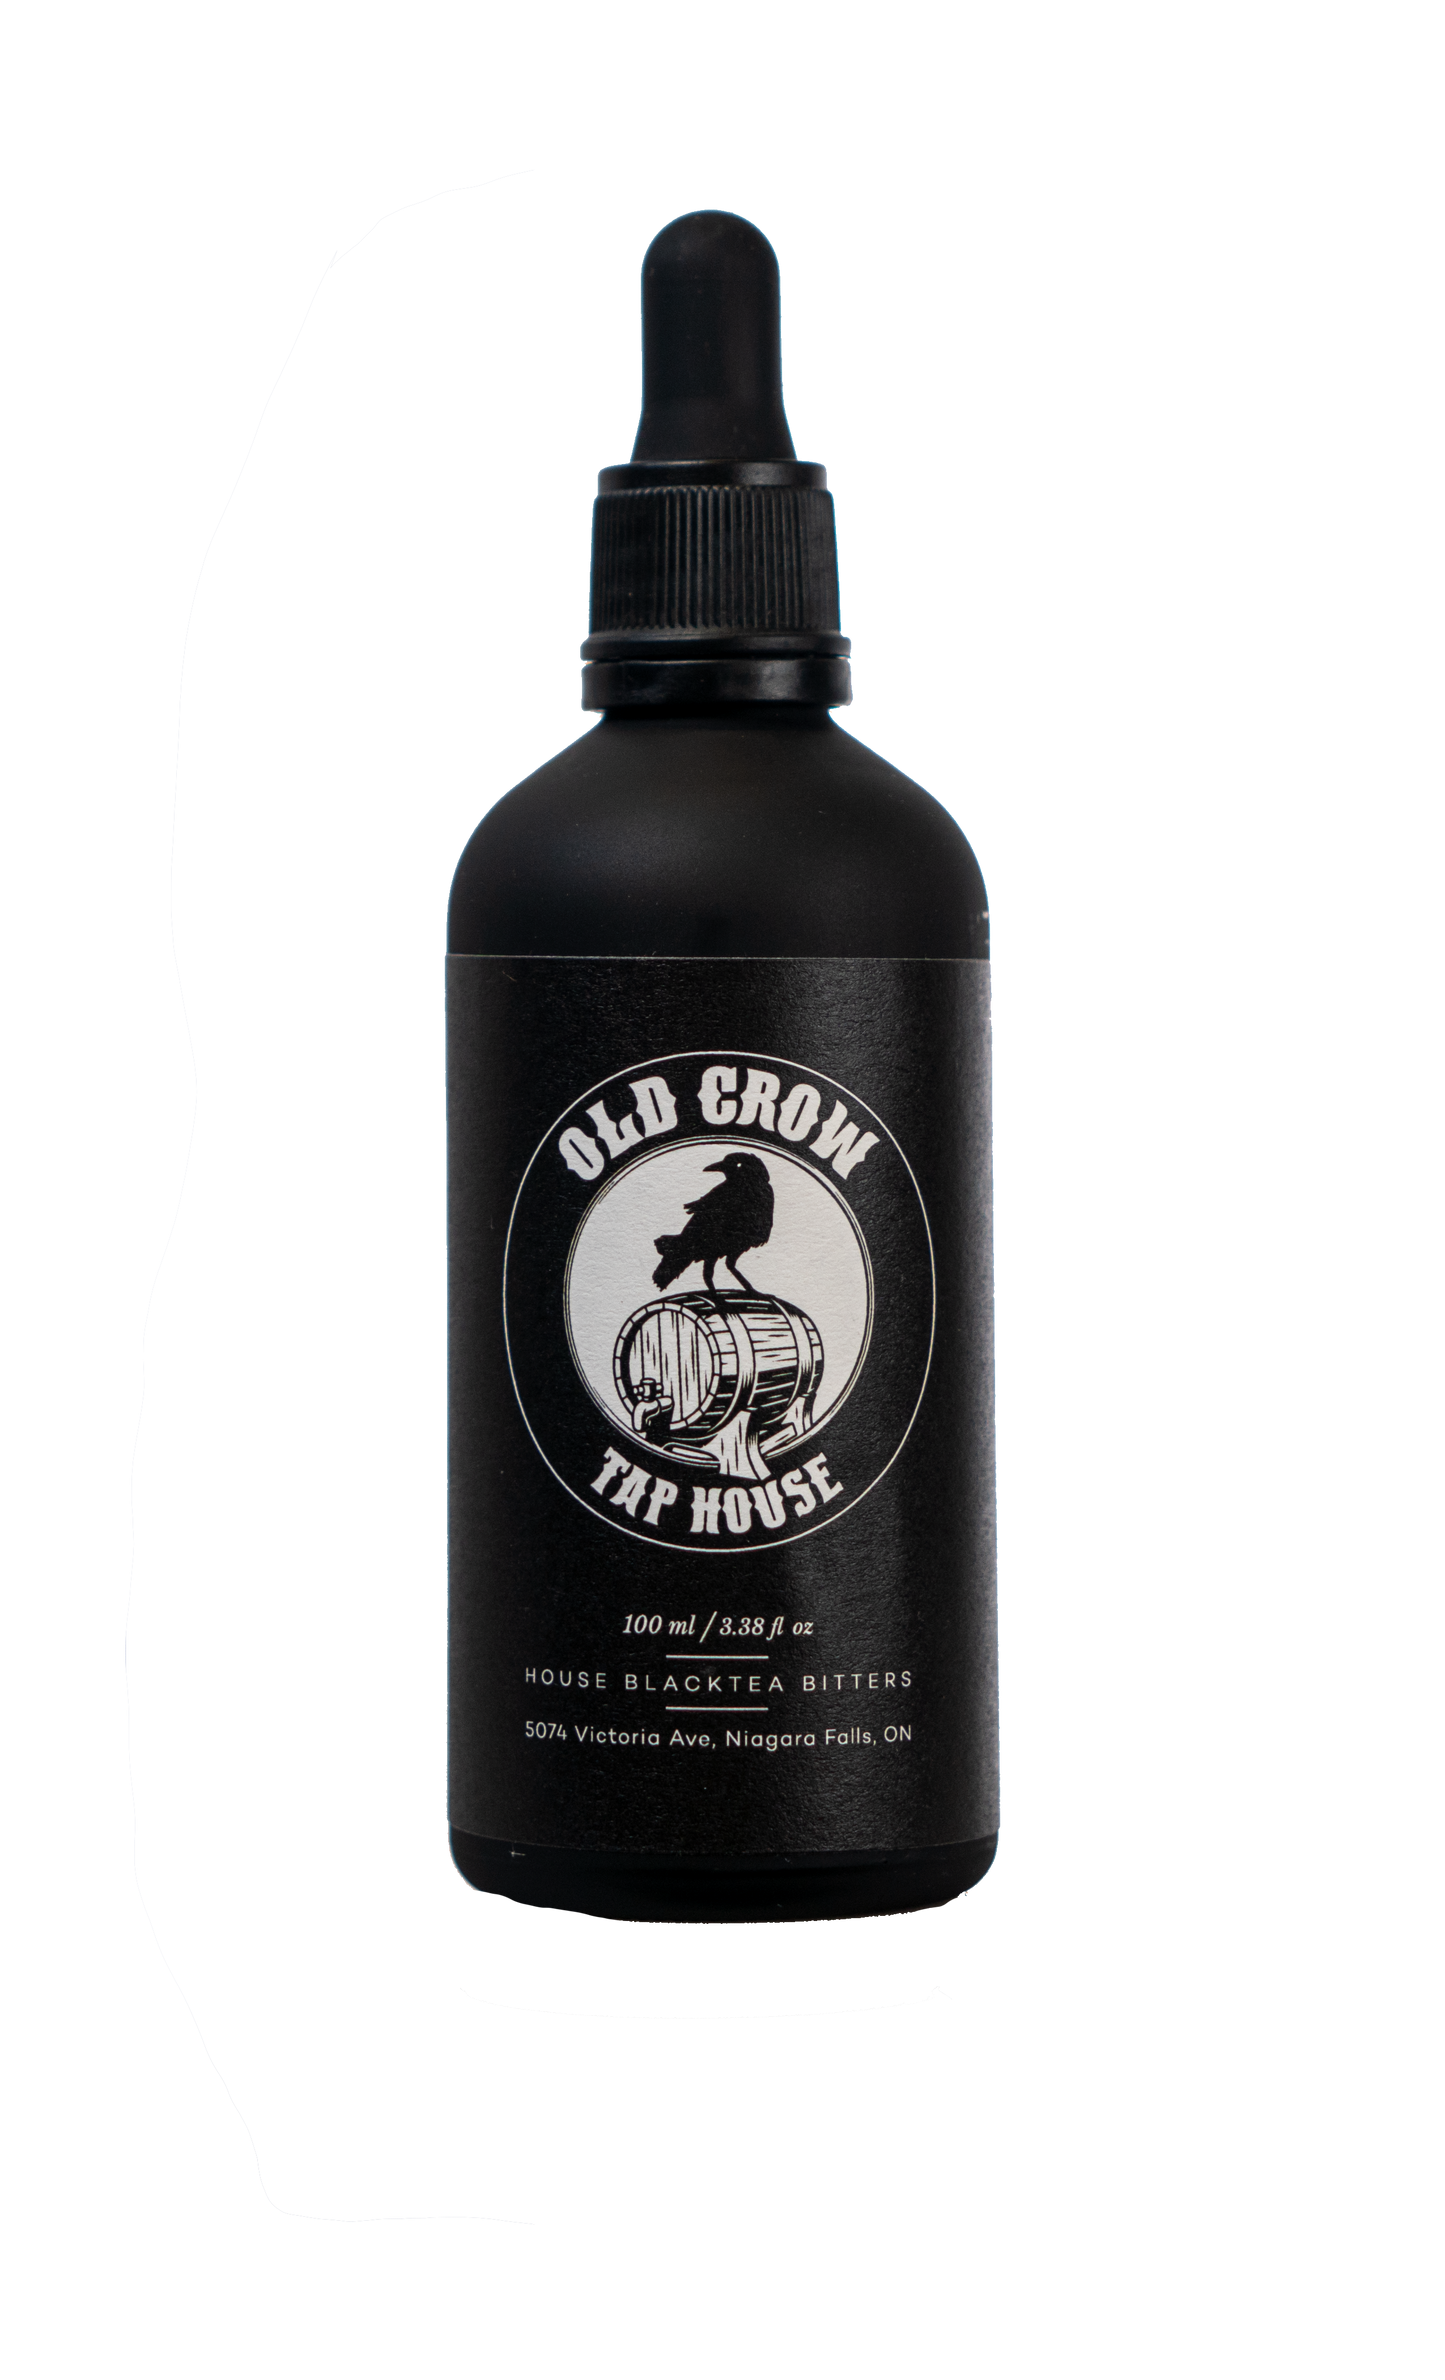 Old Crow Tap House Black Tea  Bitters